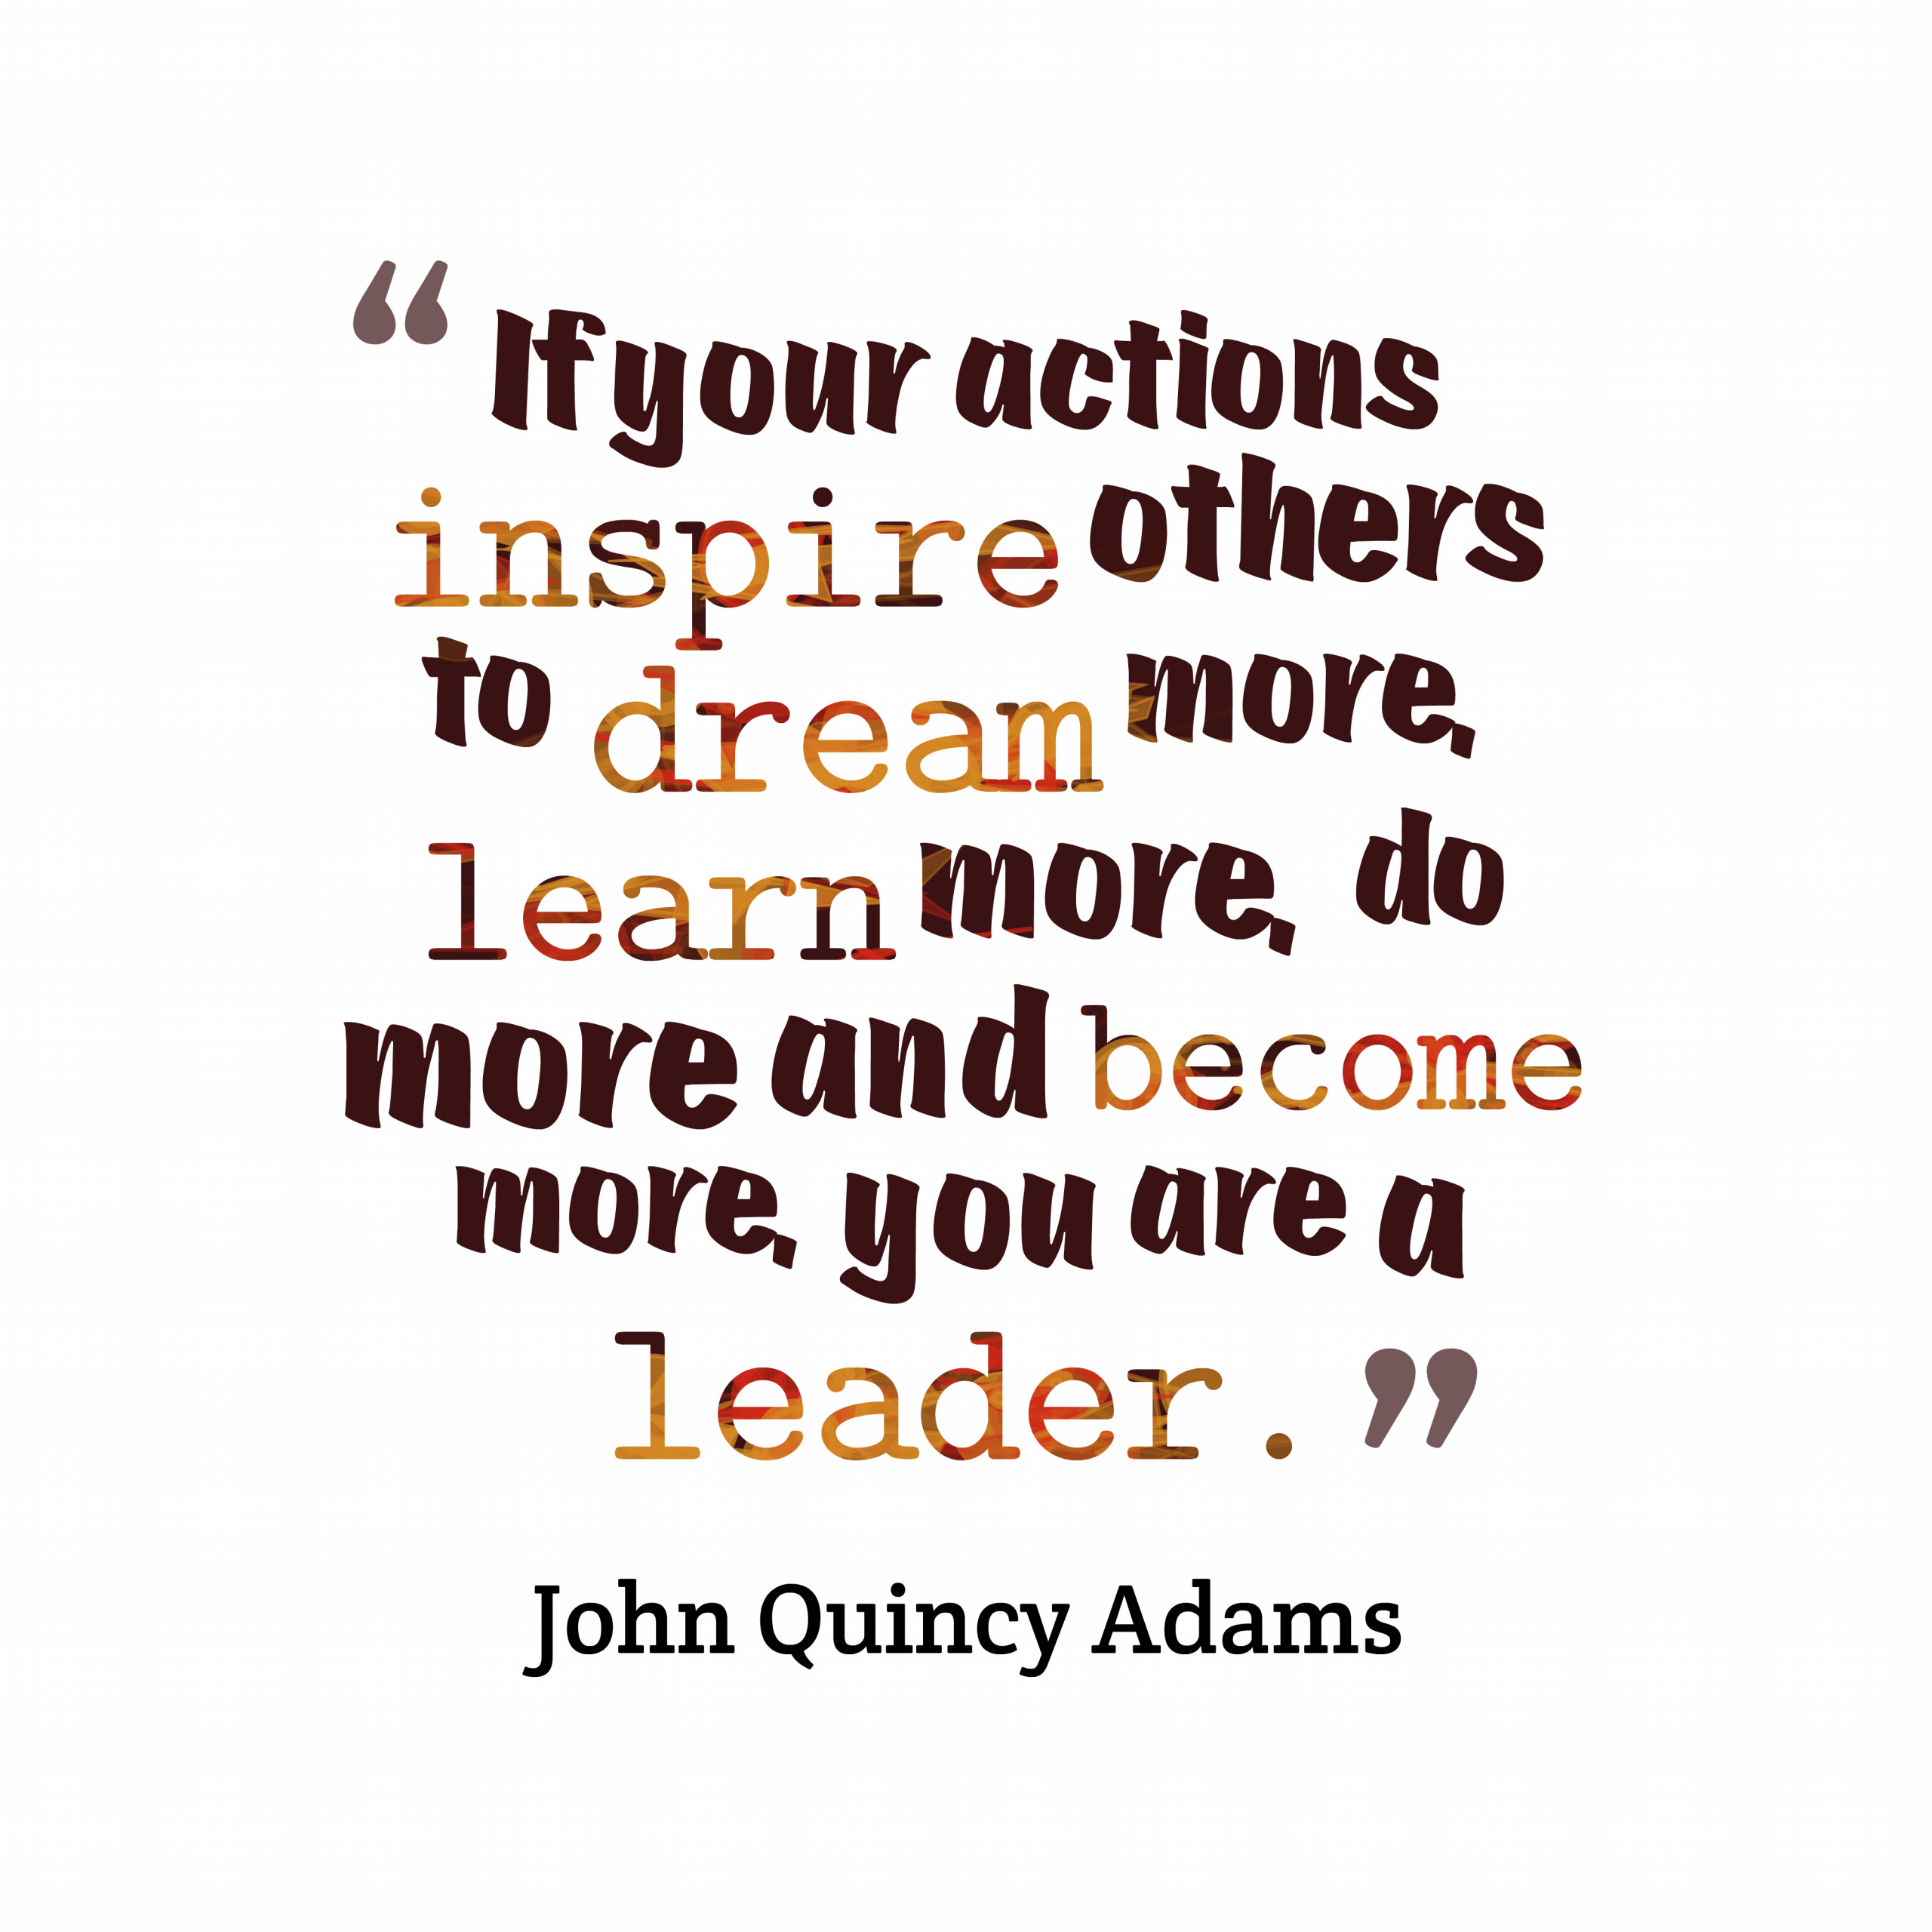 John Quincy Adams Leadership Quote
 Get high resolution using text from John Quincy Adams